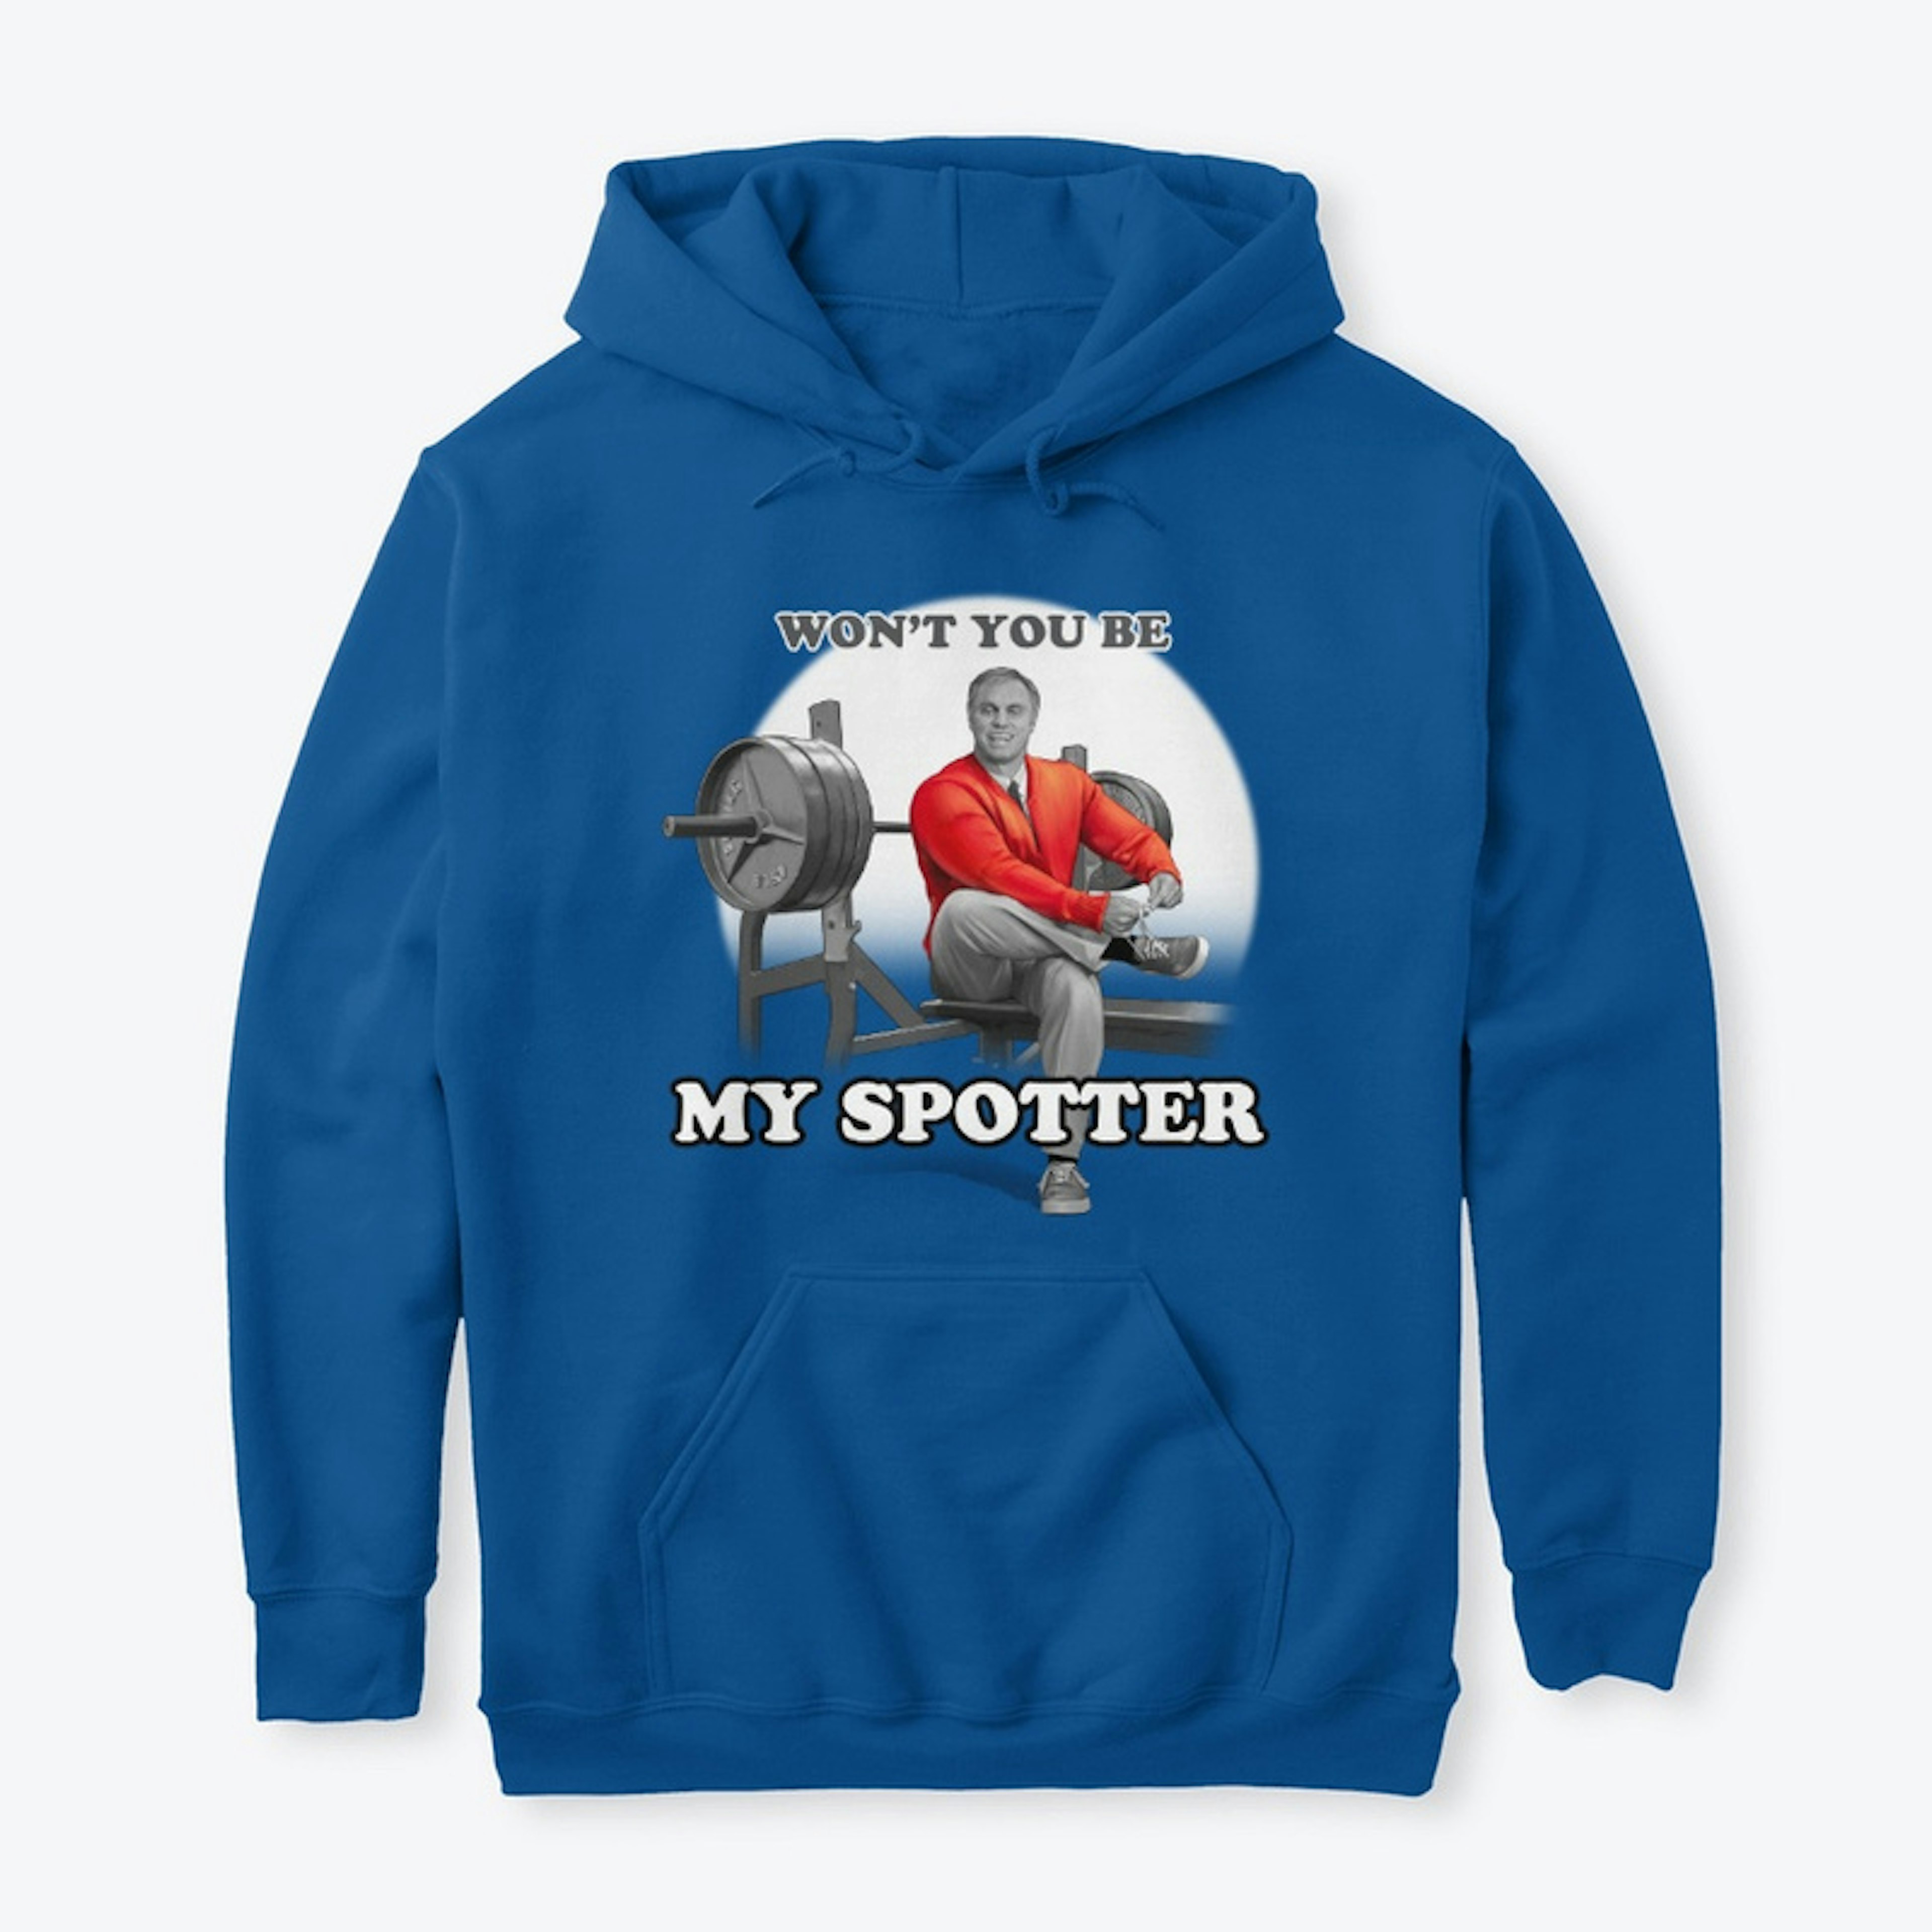 Won't you be my spotter pullover